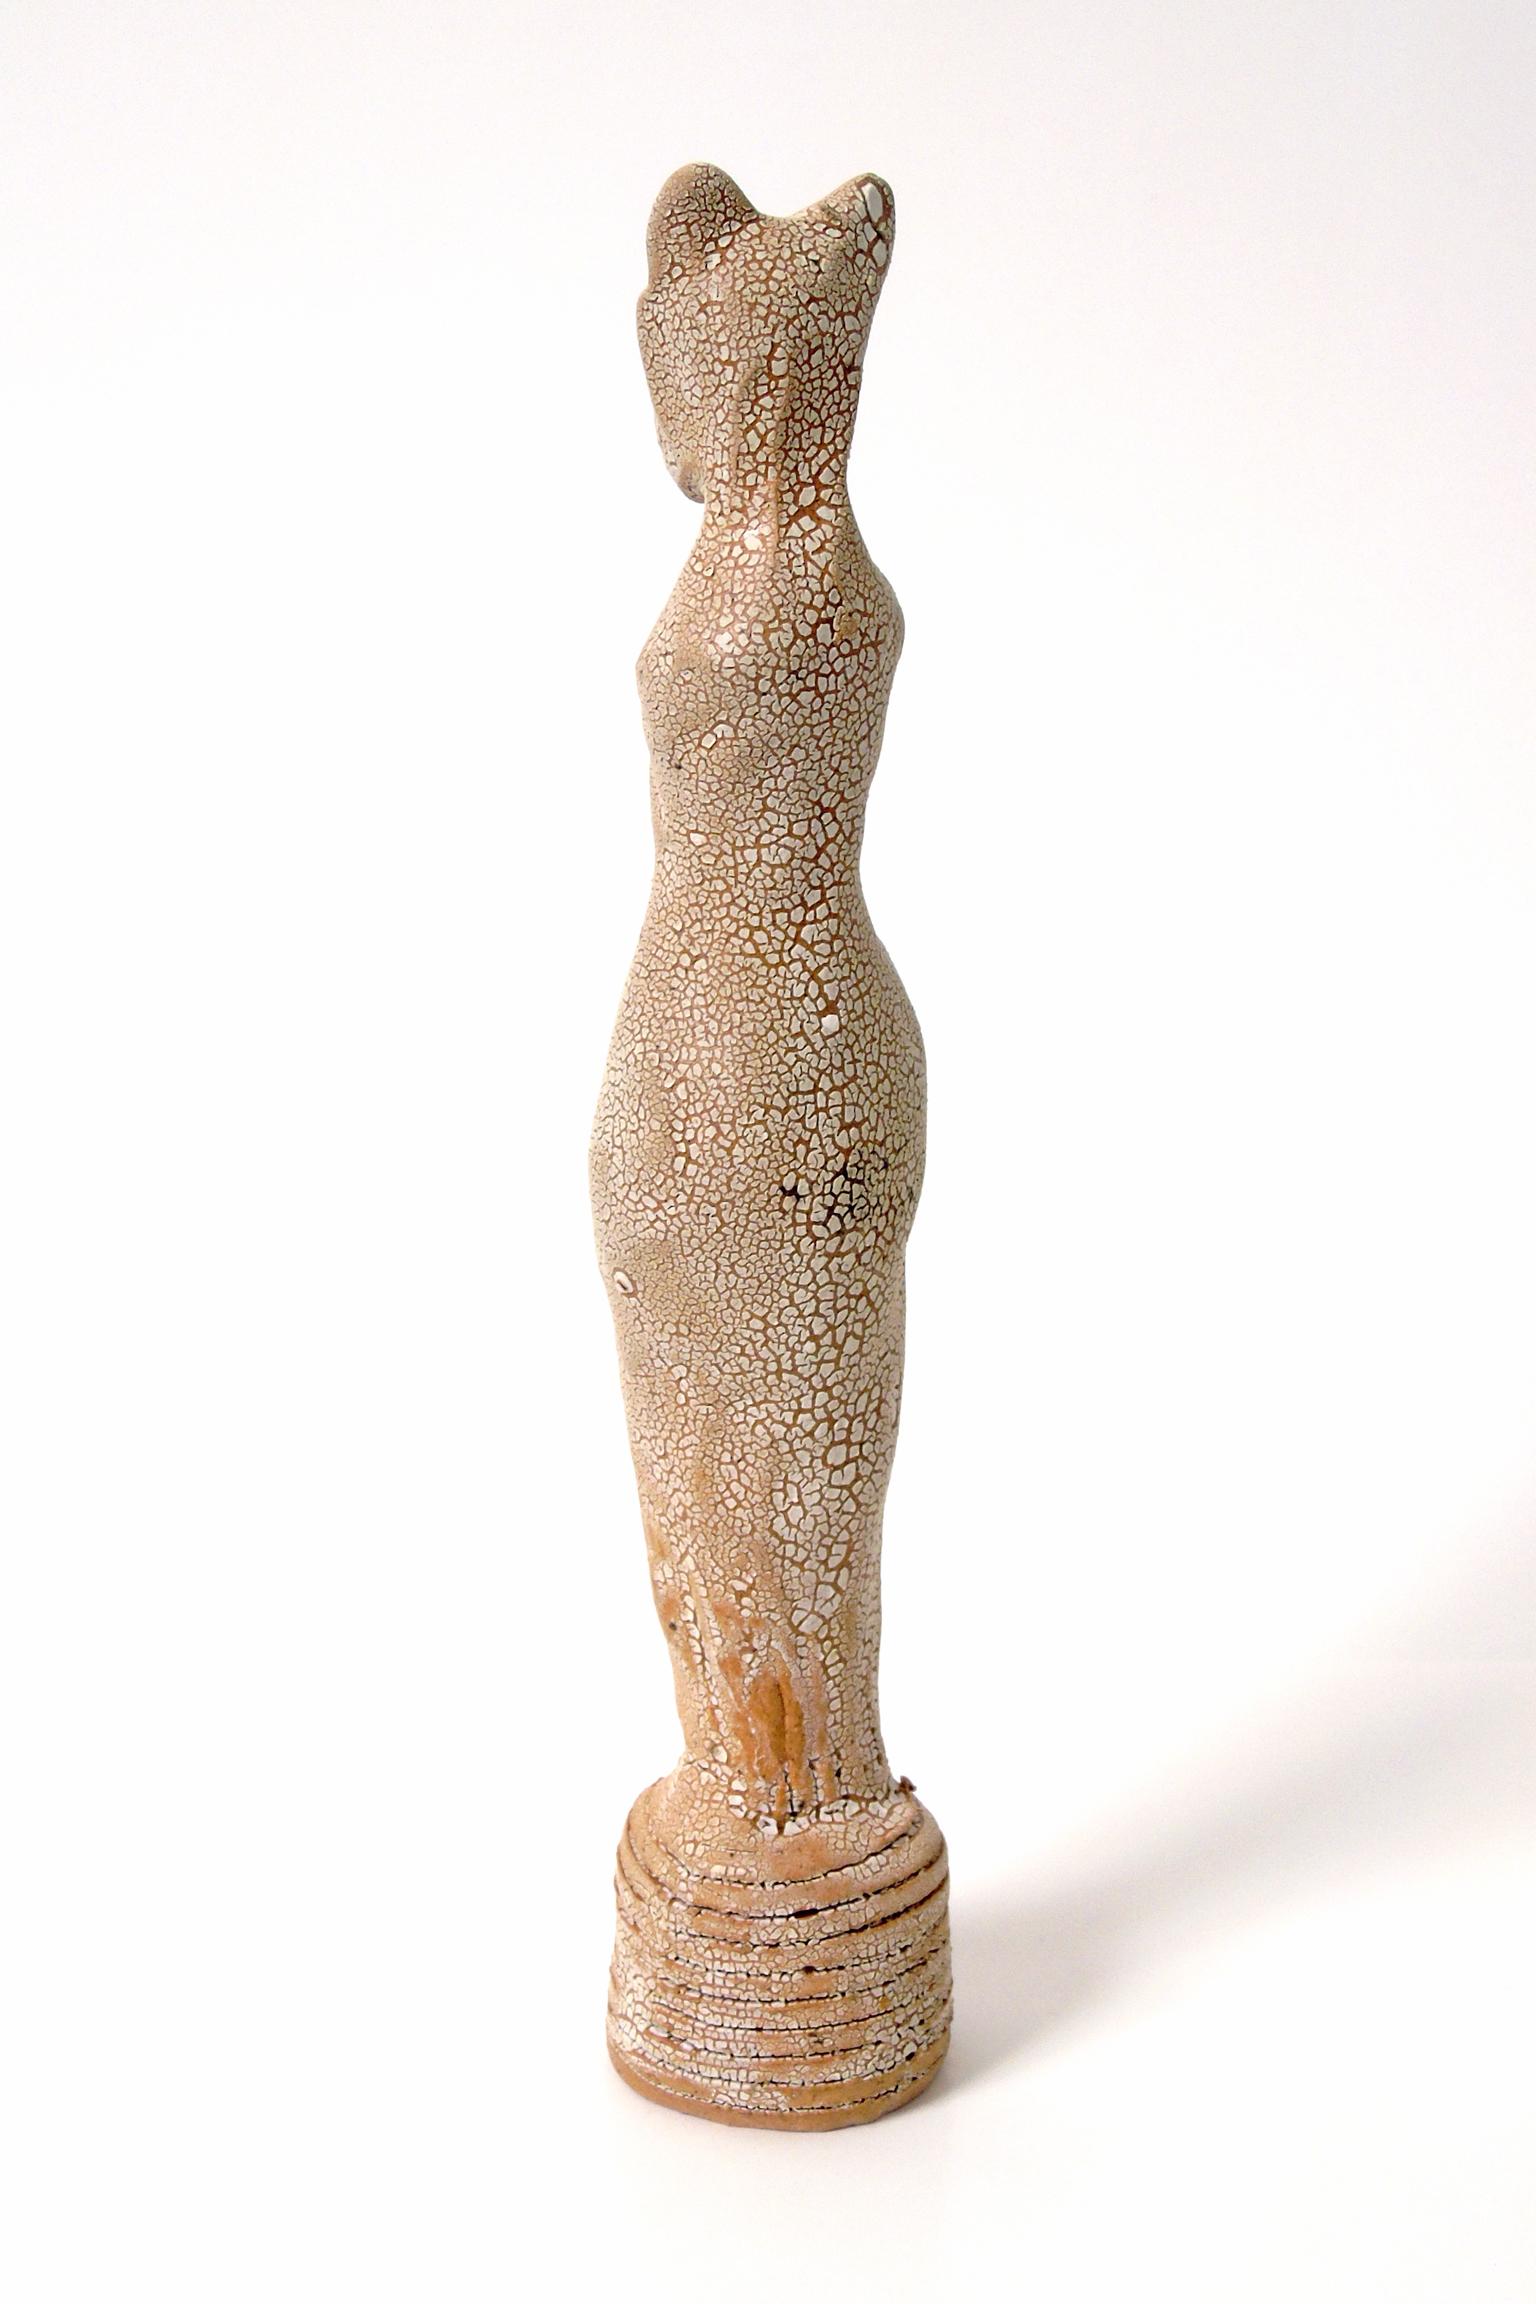 Tiny Cat Totem -108 - Contemporary Sculpture by Robin Whiteman